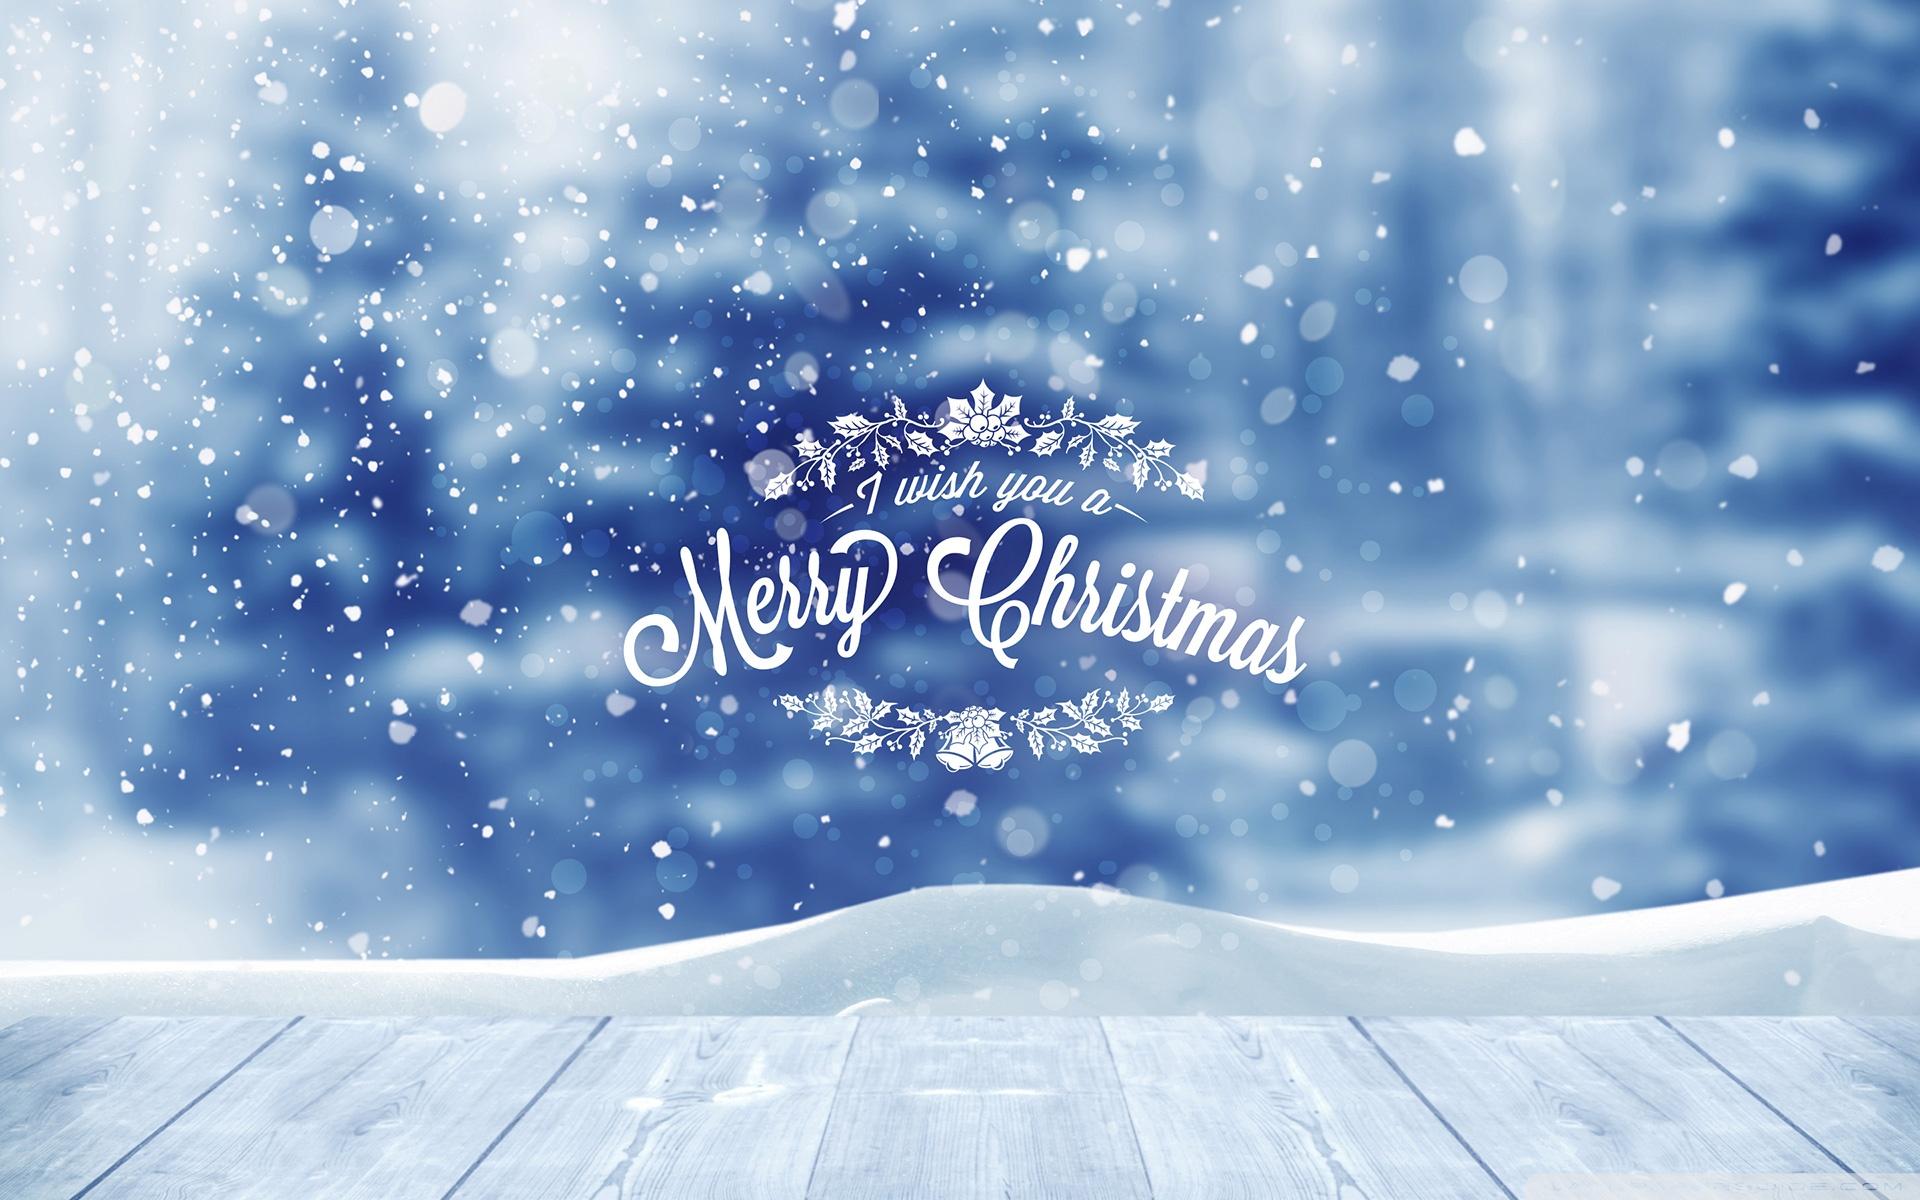 Free Merry Christmas Wallpaper HD Image for iPhone